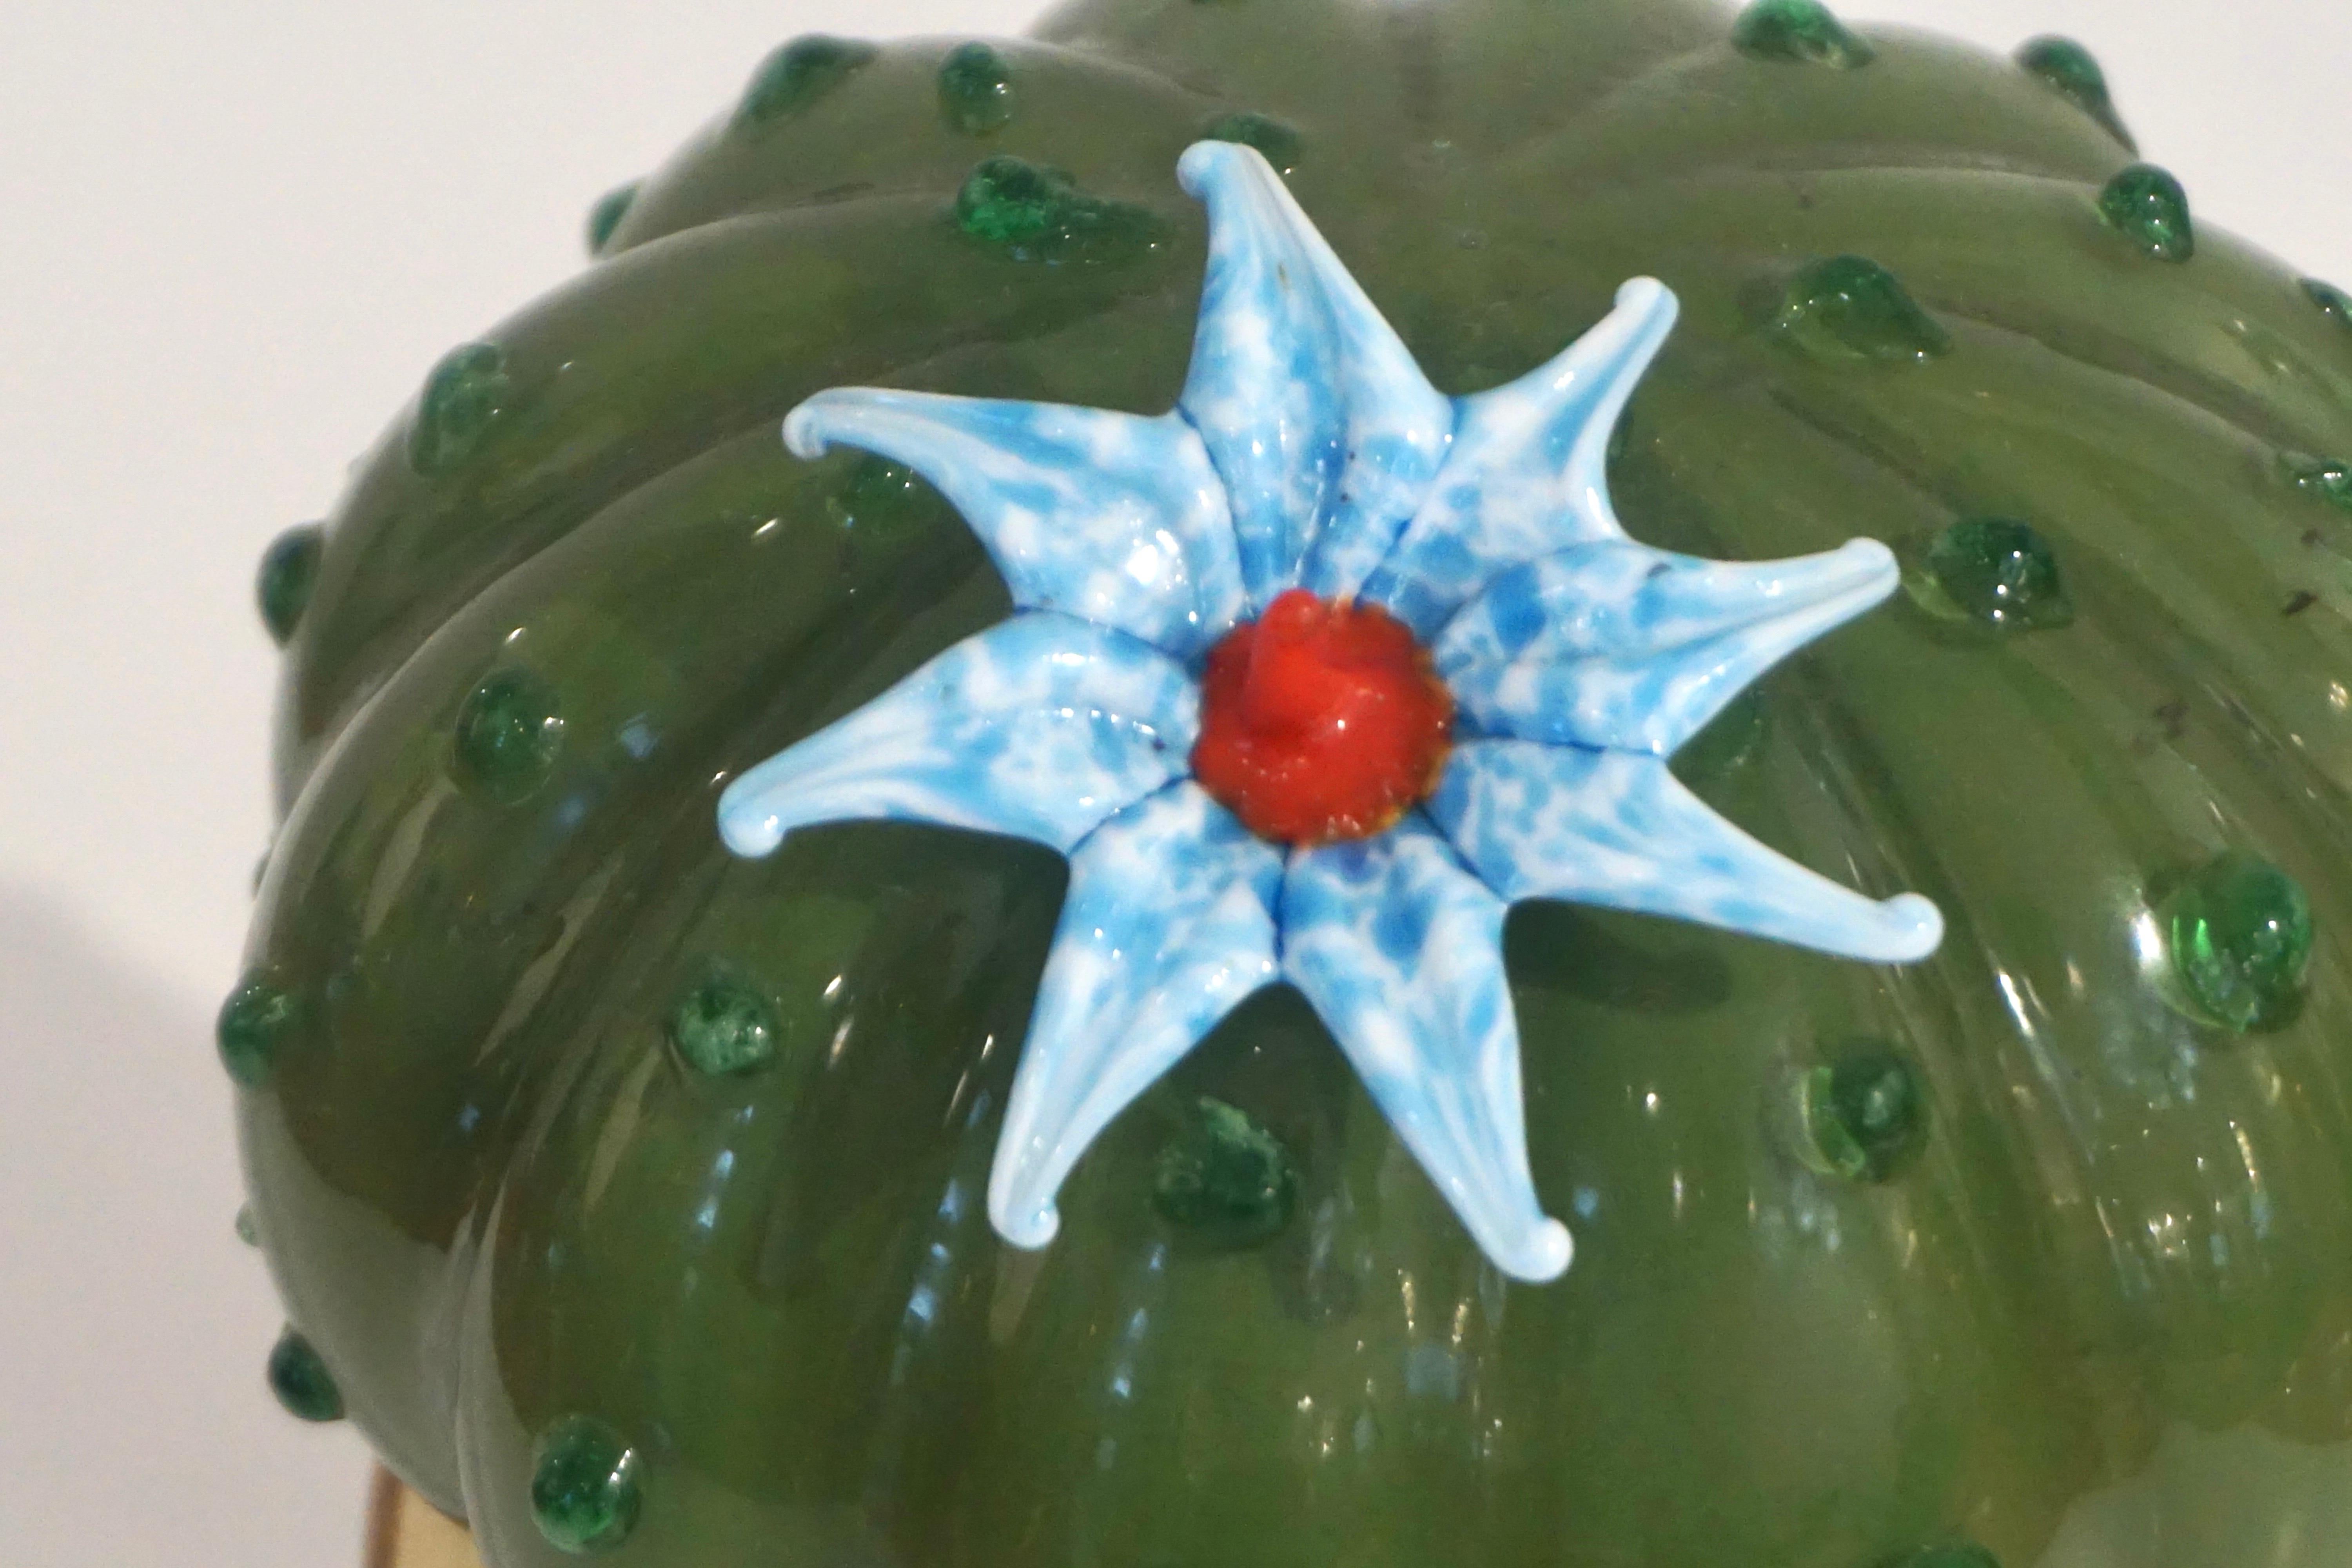 1990 Italian highly collectible glass cactus of limited edition, entirely handcrafted in Murano, with modern Minimalist design blown by Formia, in a lifelike organic modernist shape in overlaid moss green Murano glass highlighted with prickles in